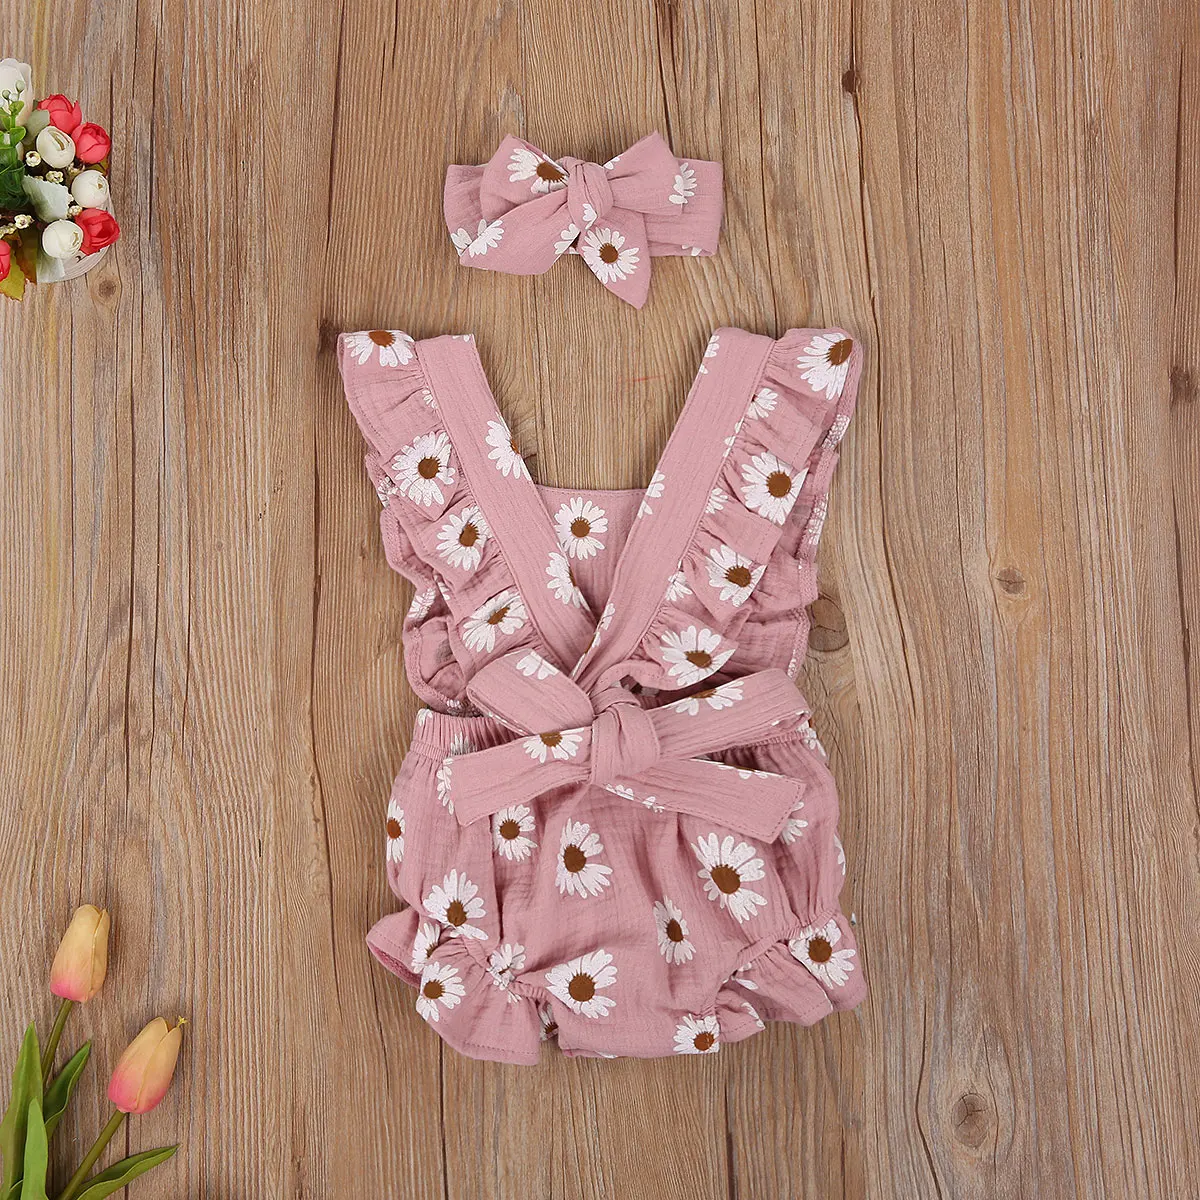 

New Baby Girls Two Piece Clothes Set Sleeveless Square Collar Romper + Bow Knot Headdress Pink / Yellow 0-24 Months